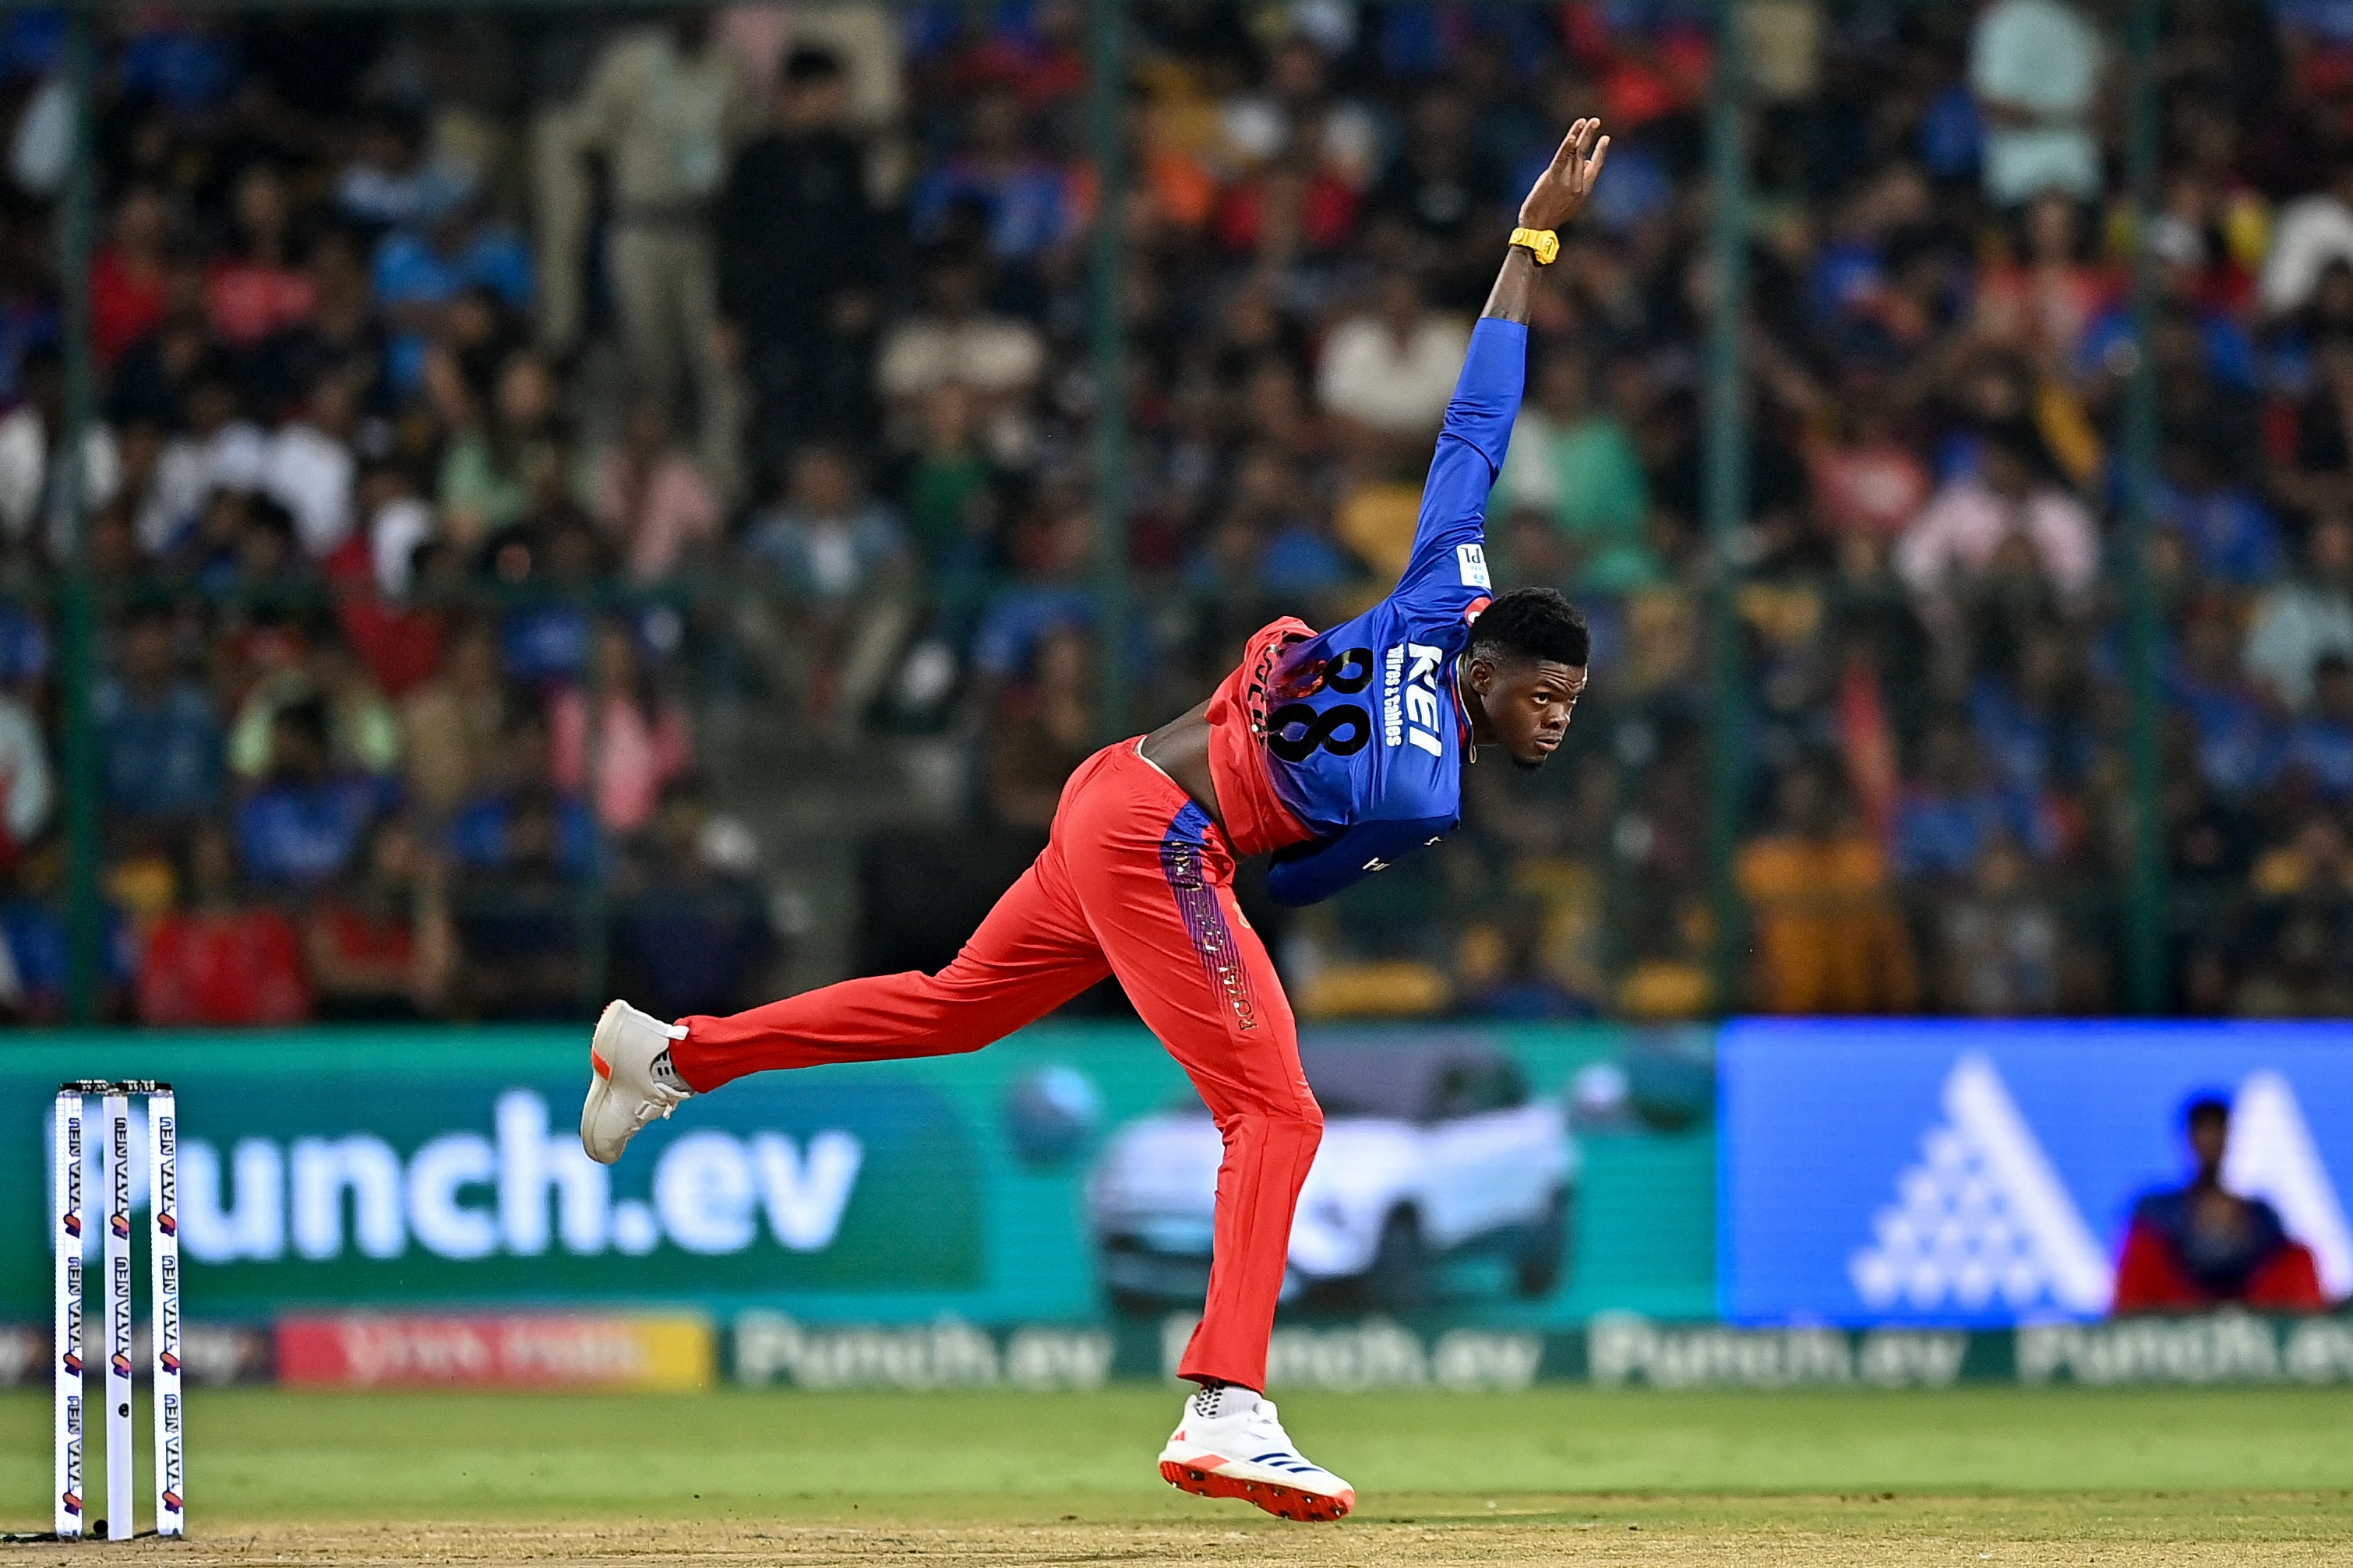 Pace bowler, Alzarri Joseph, who plays for Royal Challengers Bengaluru in the IPL, could hold the key for West Indies’ T20 World Cup hopes.